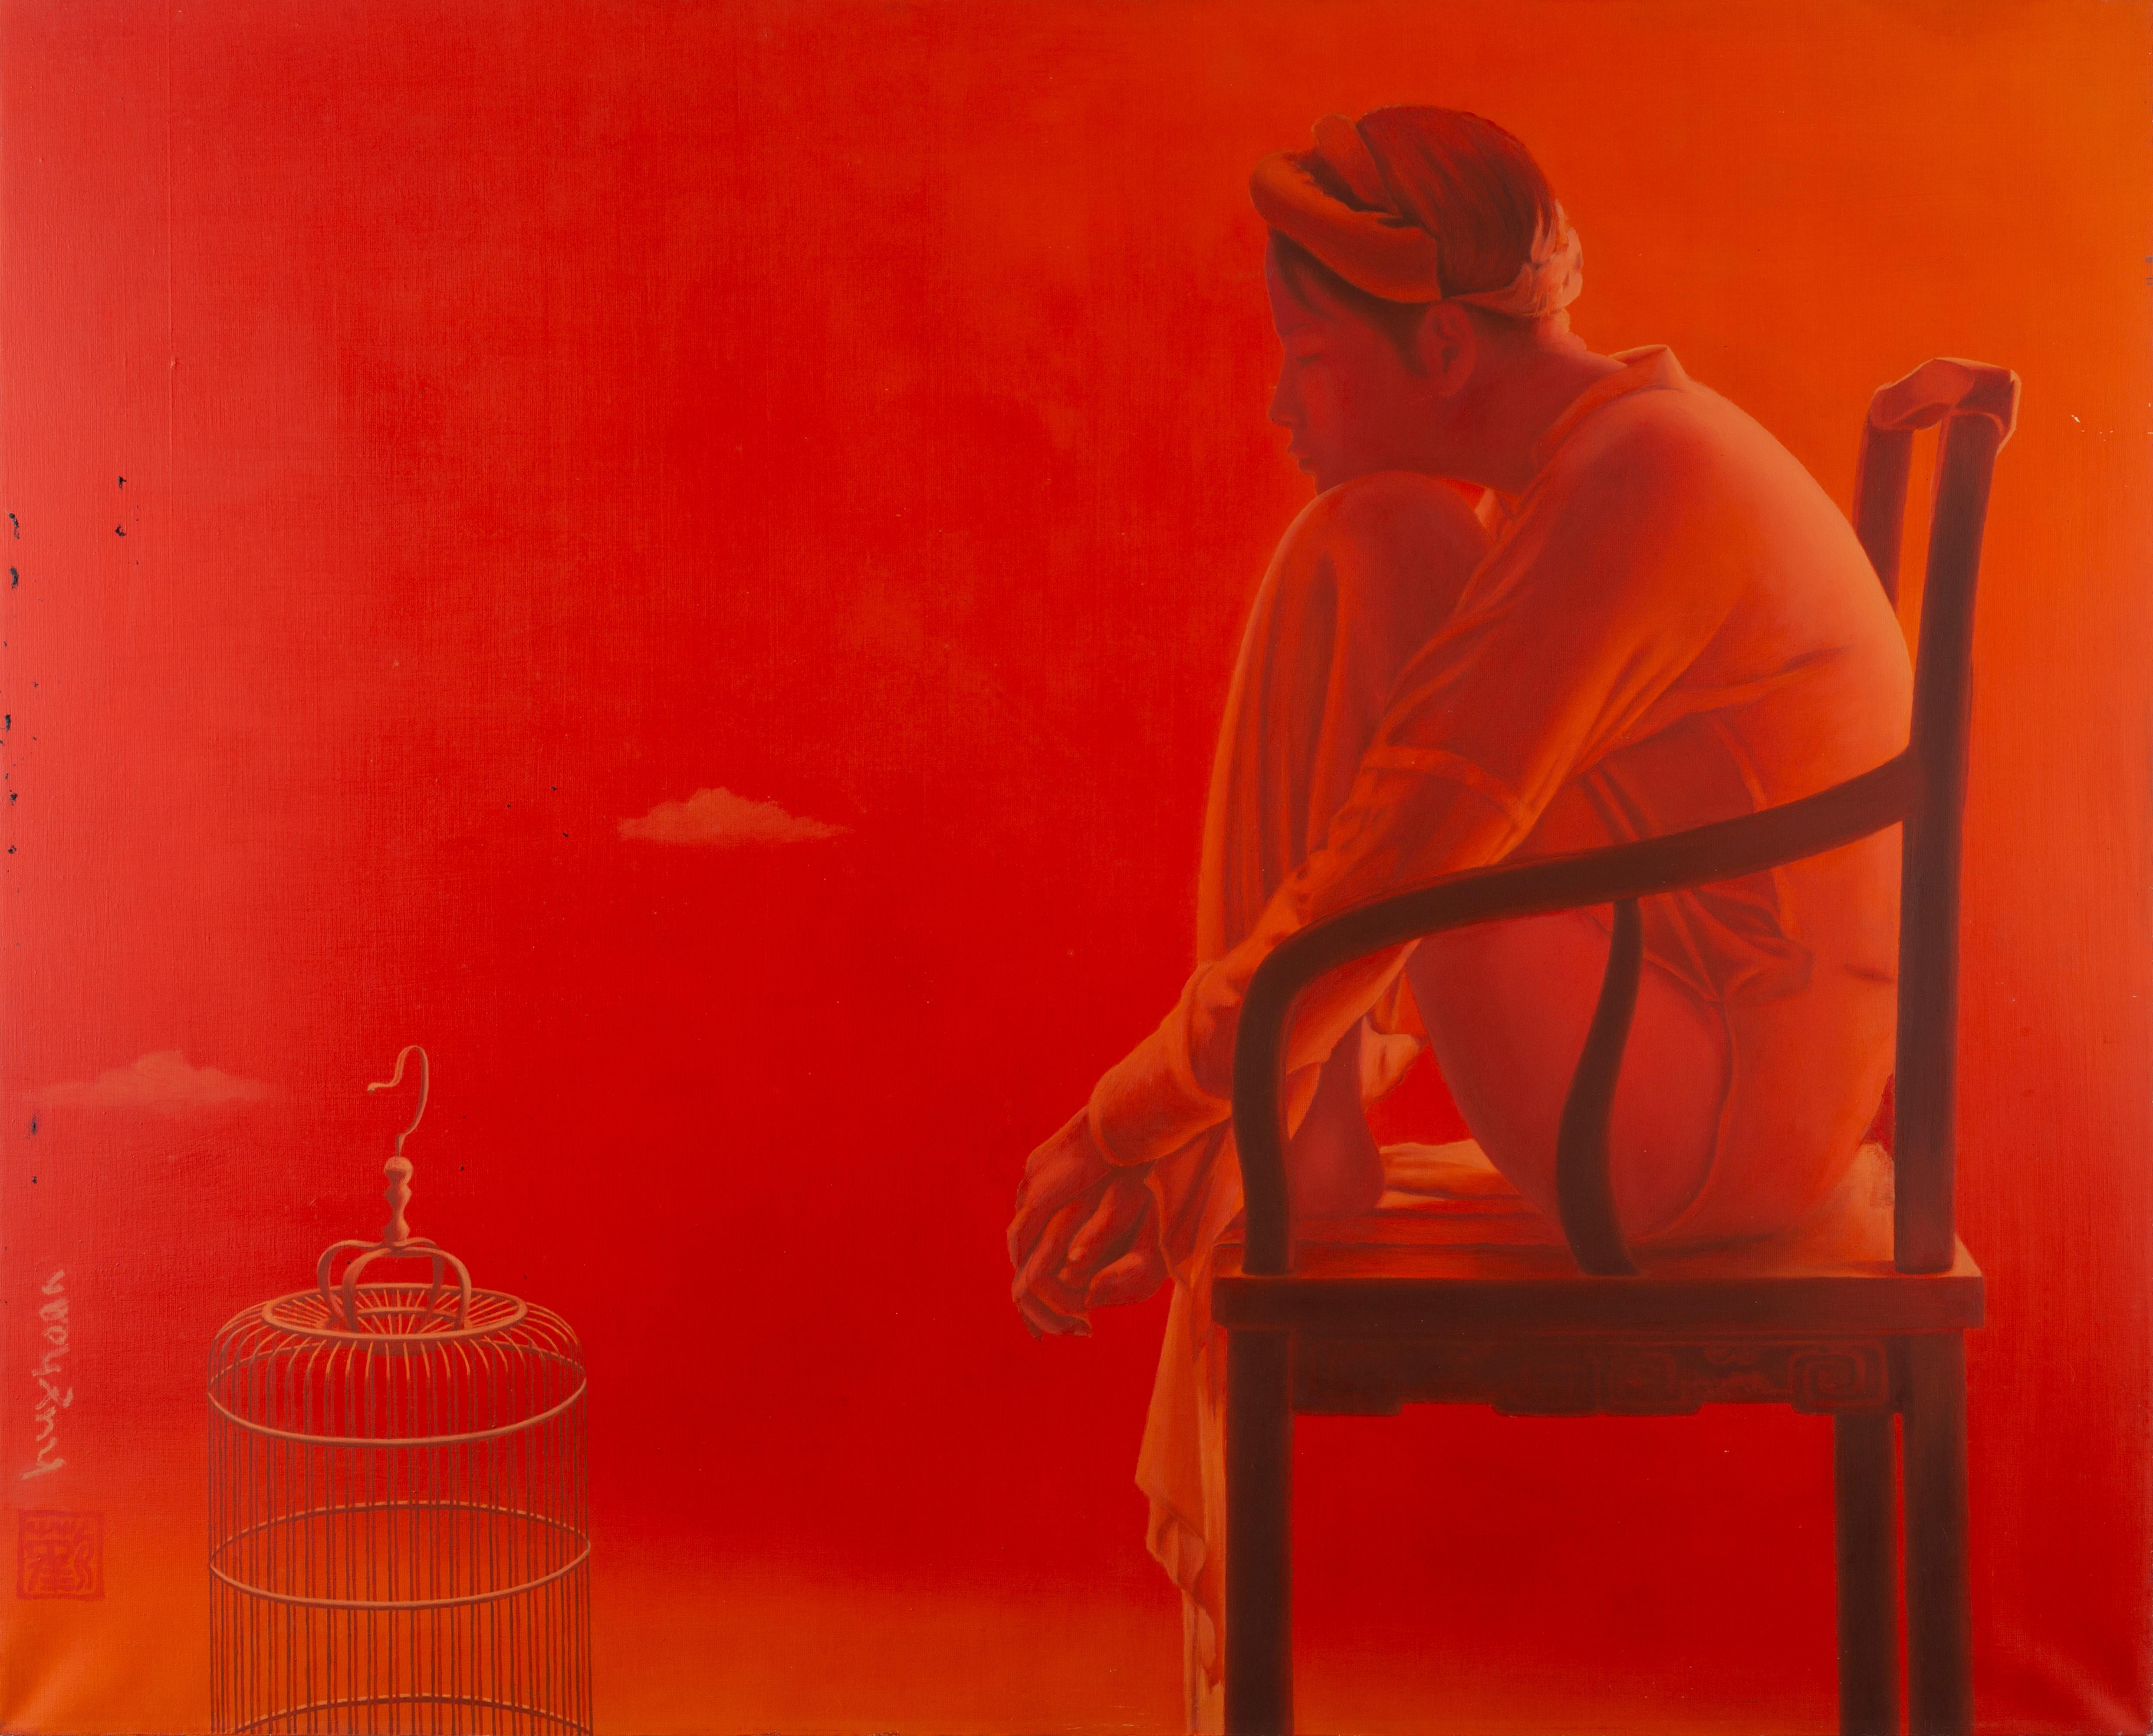 Tran Huy Hoan Nude Painting - 'Interwined', Red Monochromatic Oil Painting, Female Figure